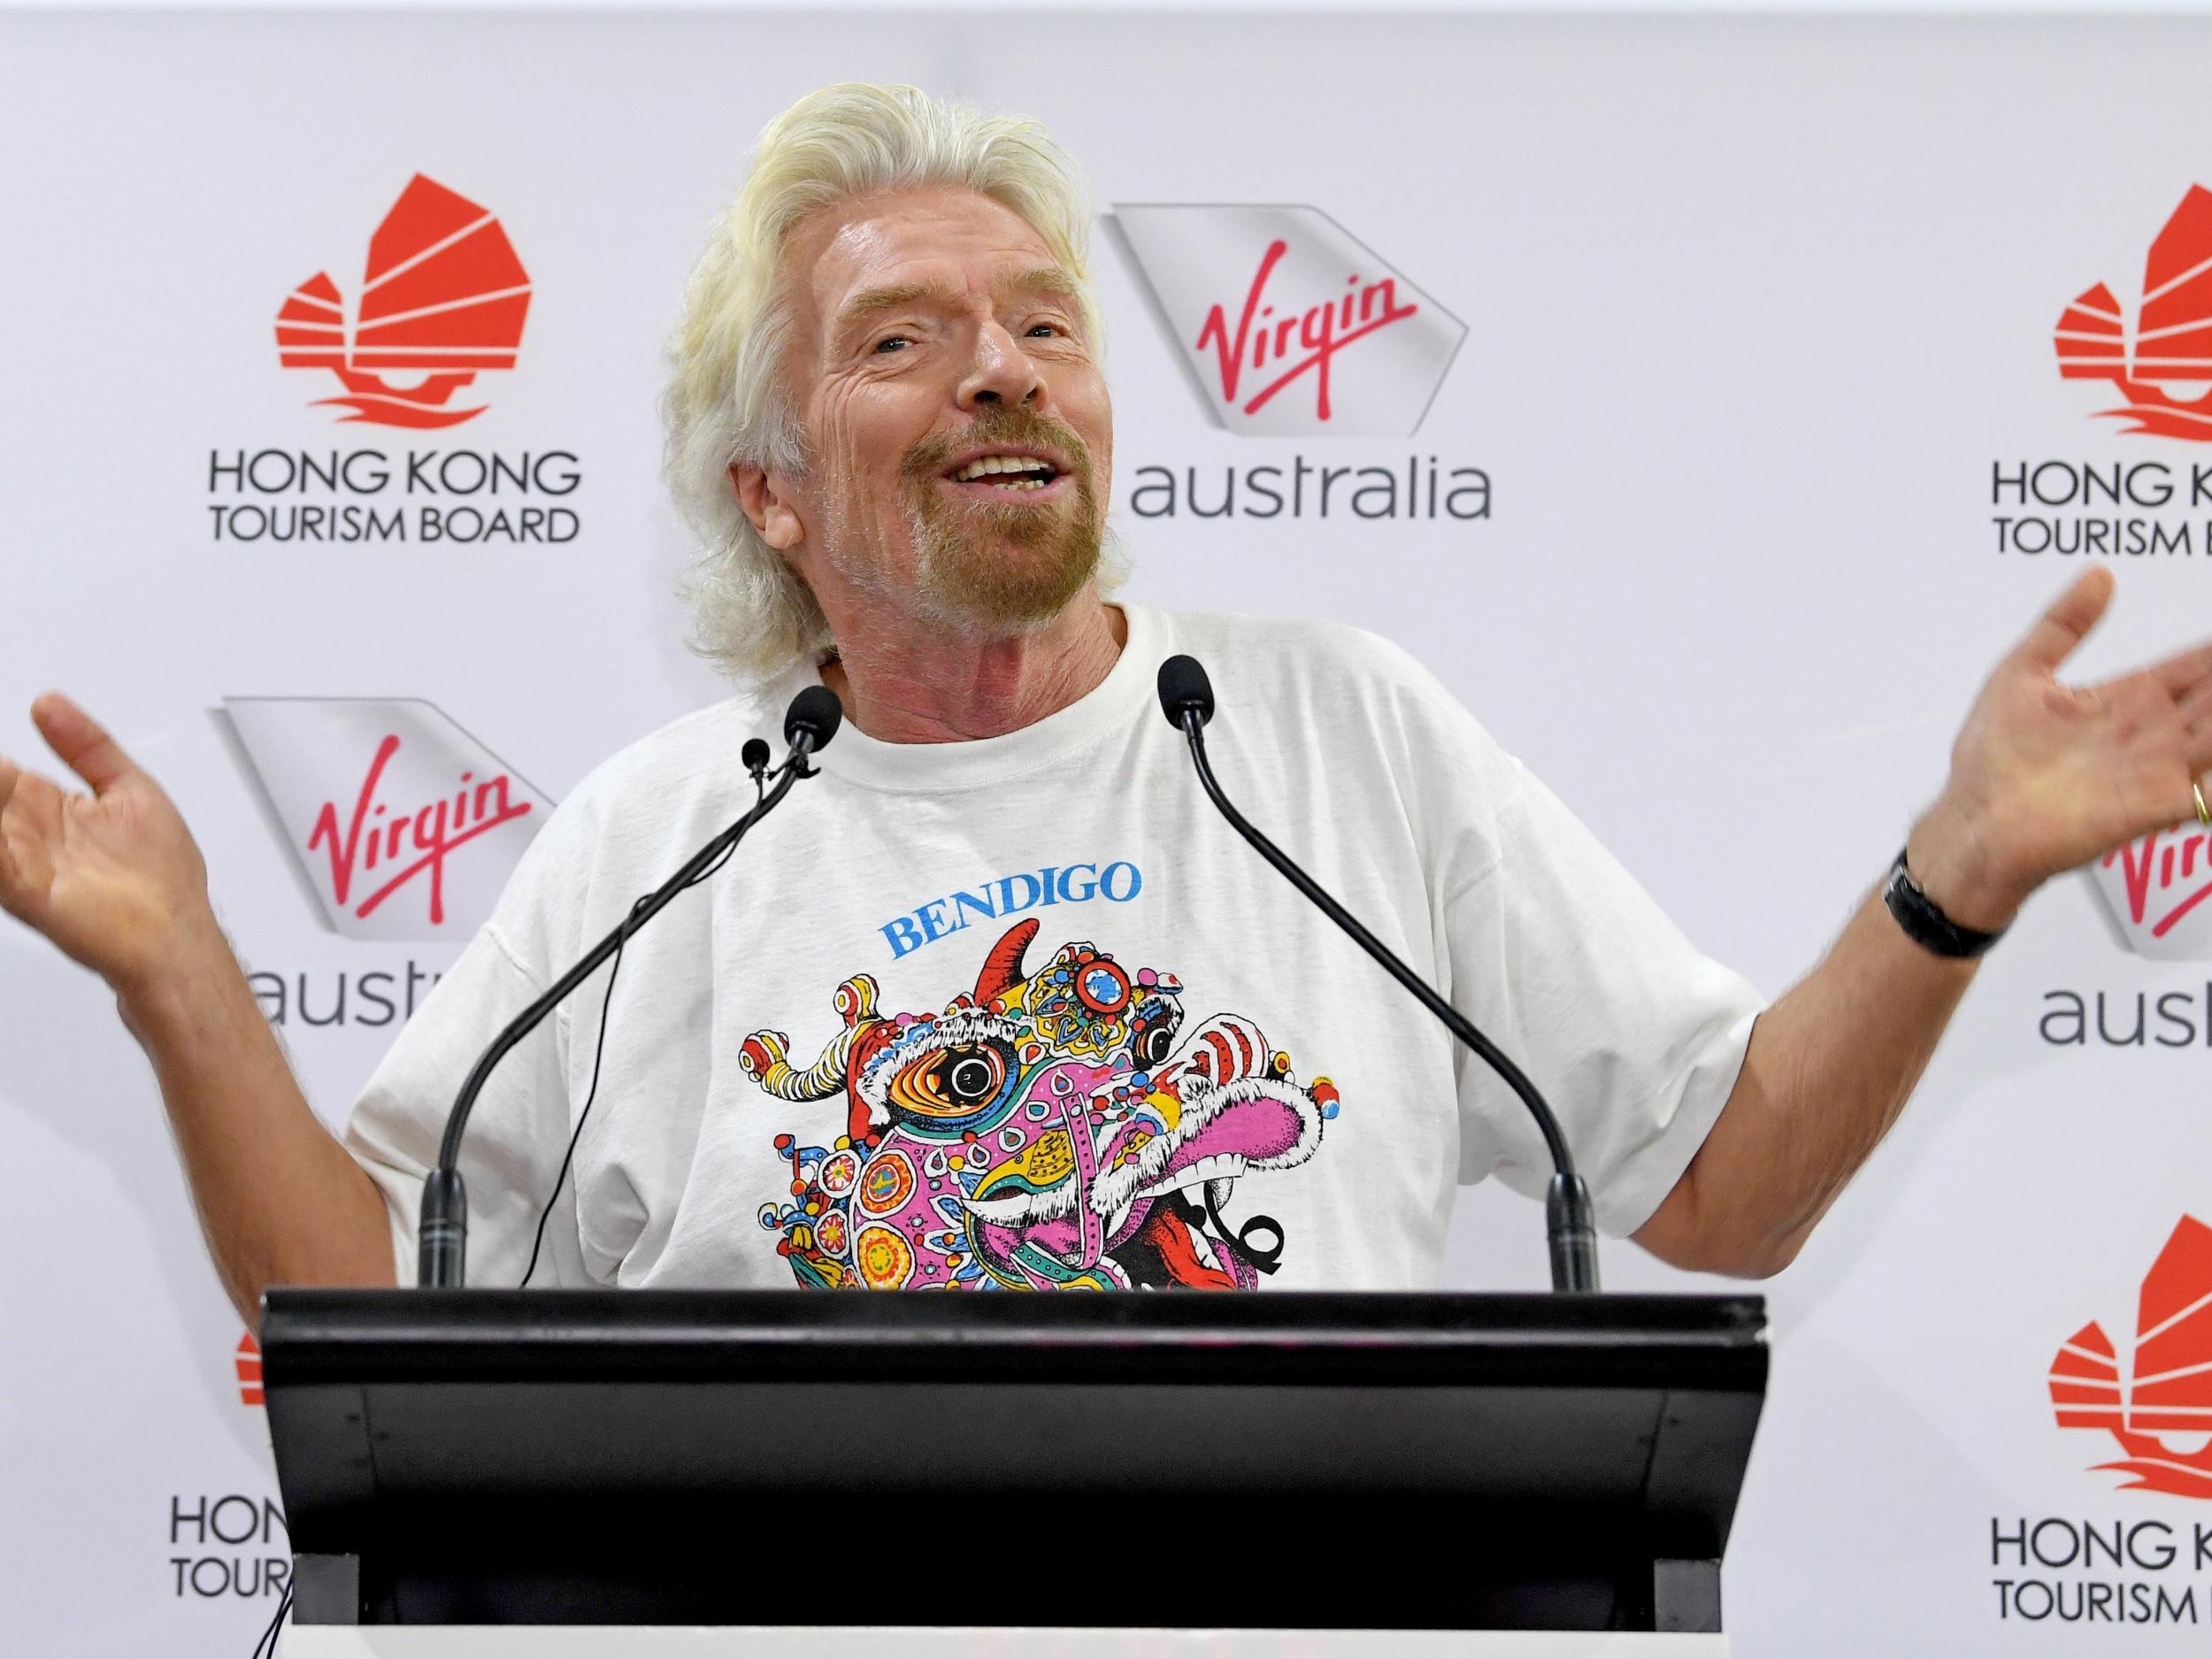 Richard Branson claims his success has nothing to do with luck